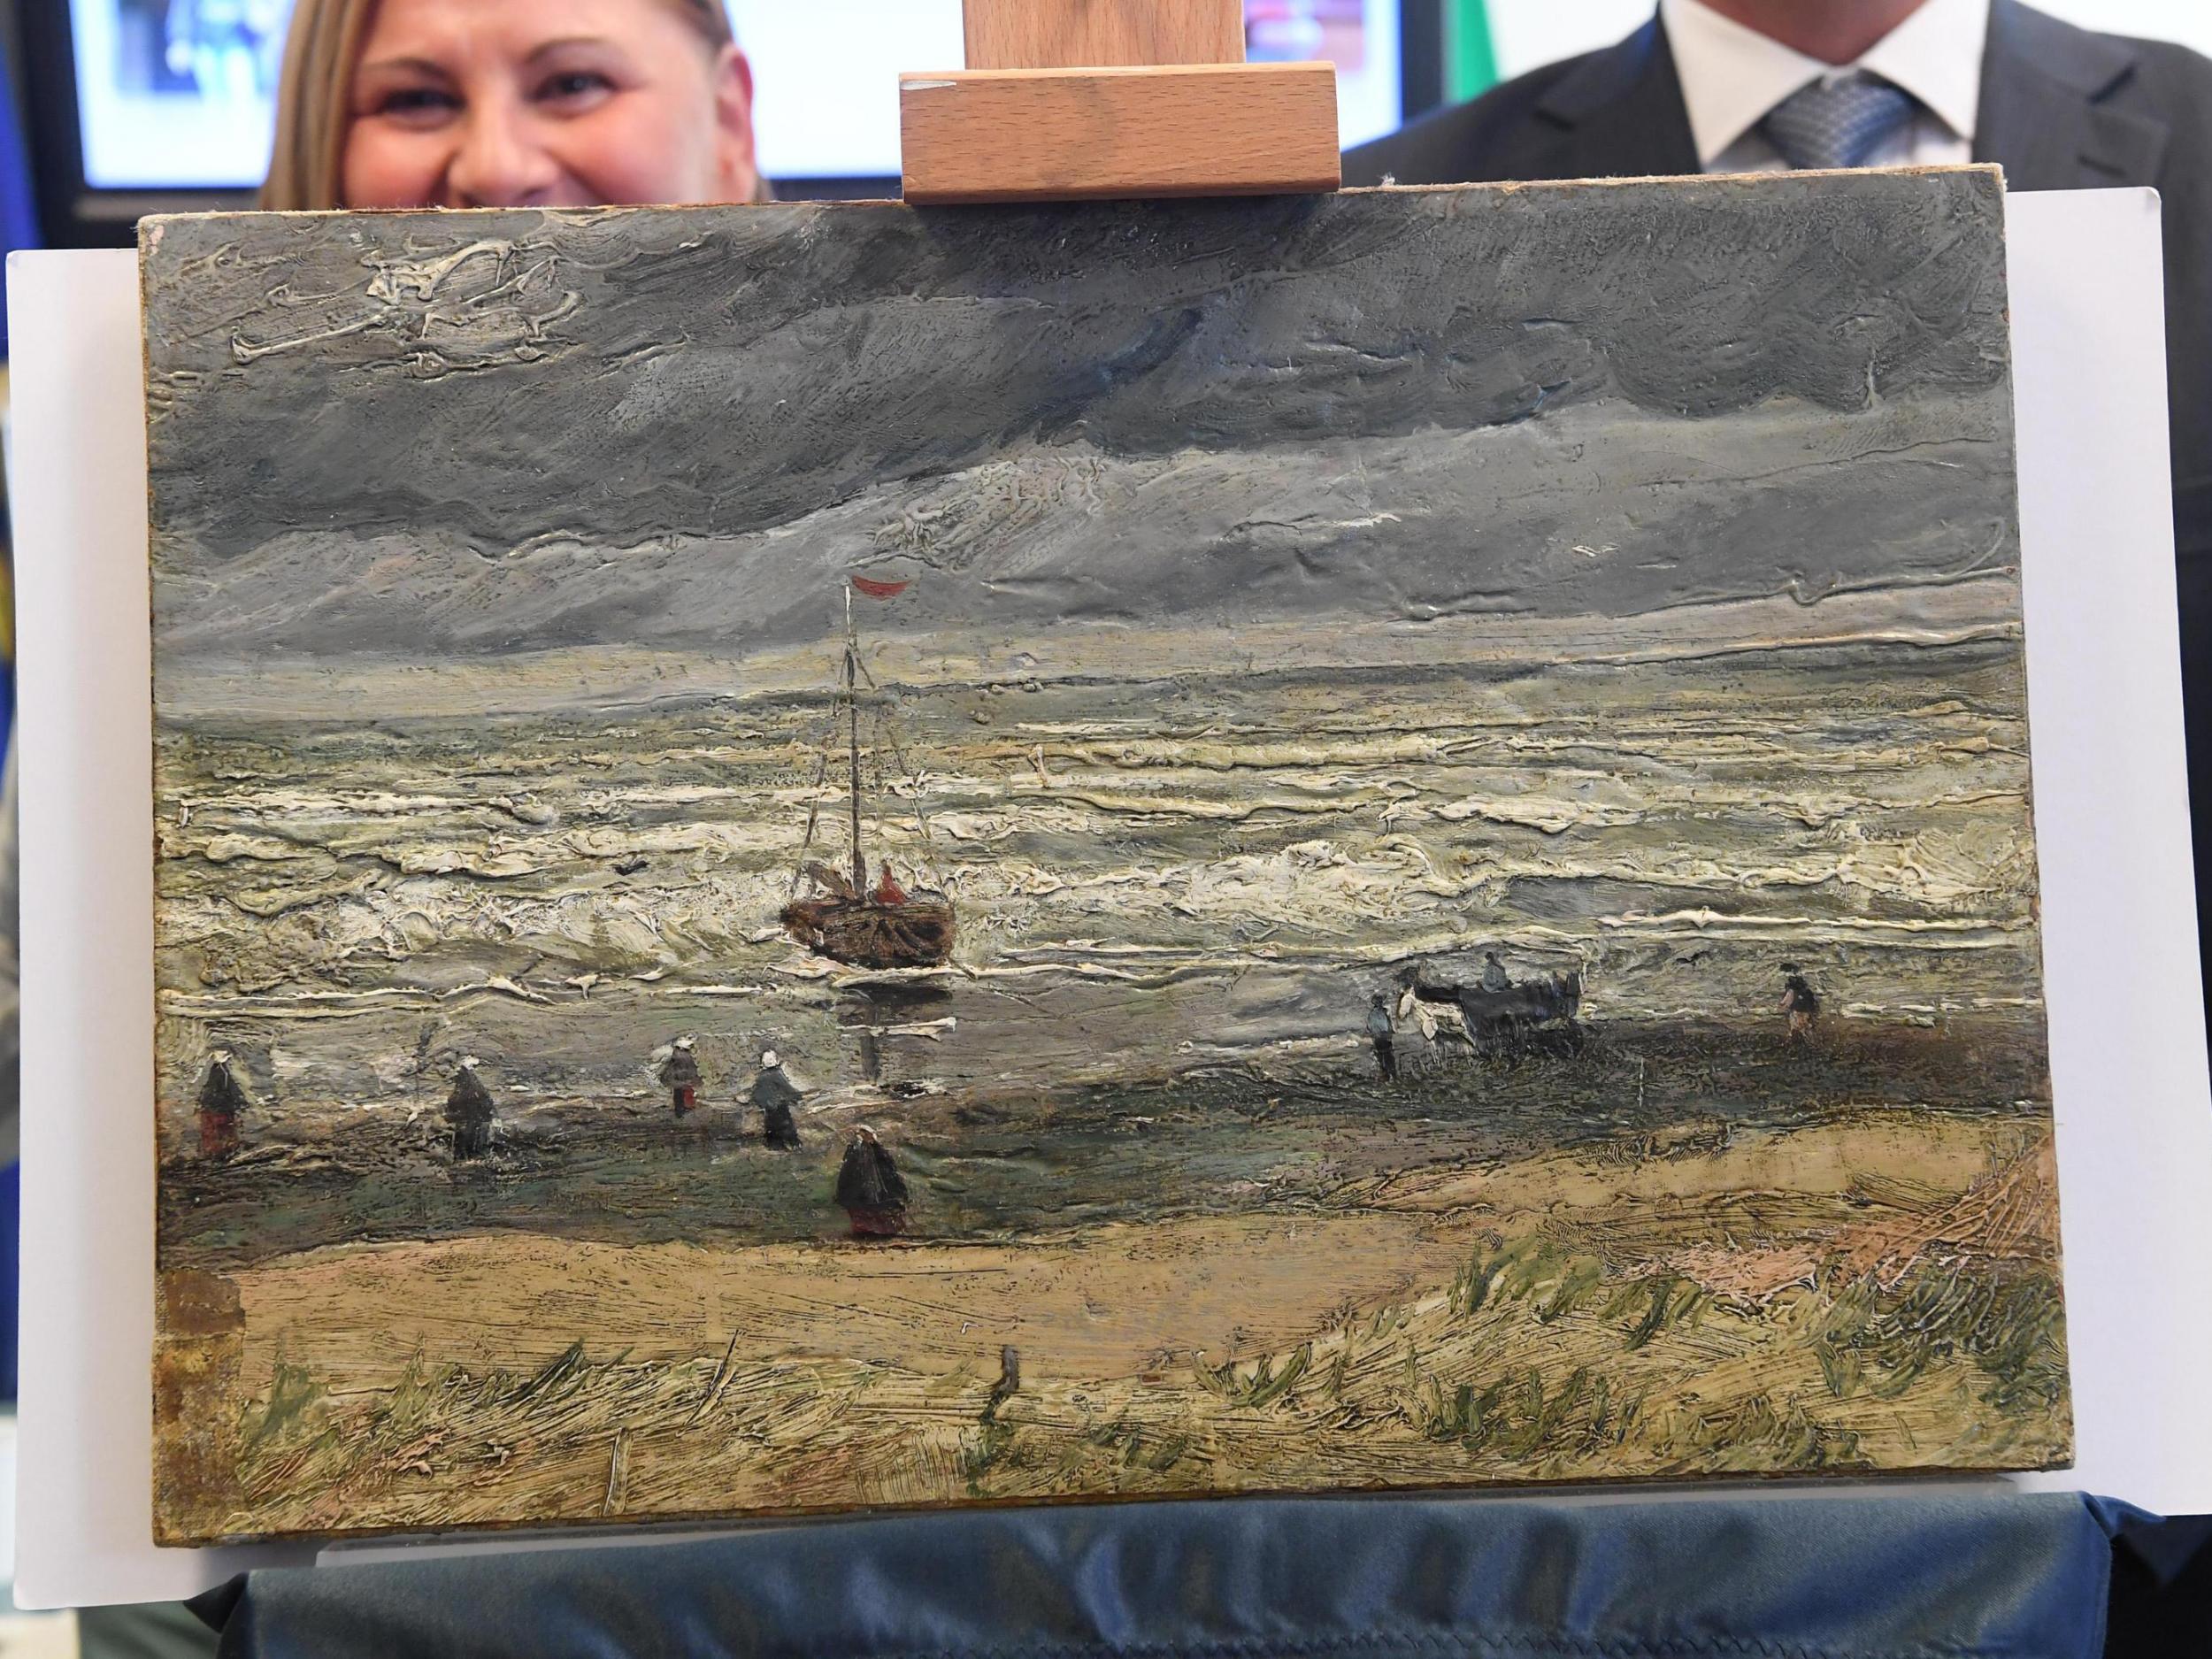 Seascape at Scheveningen by Van Gogh, one of the paintings recovered in an anti-mafia raid